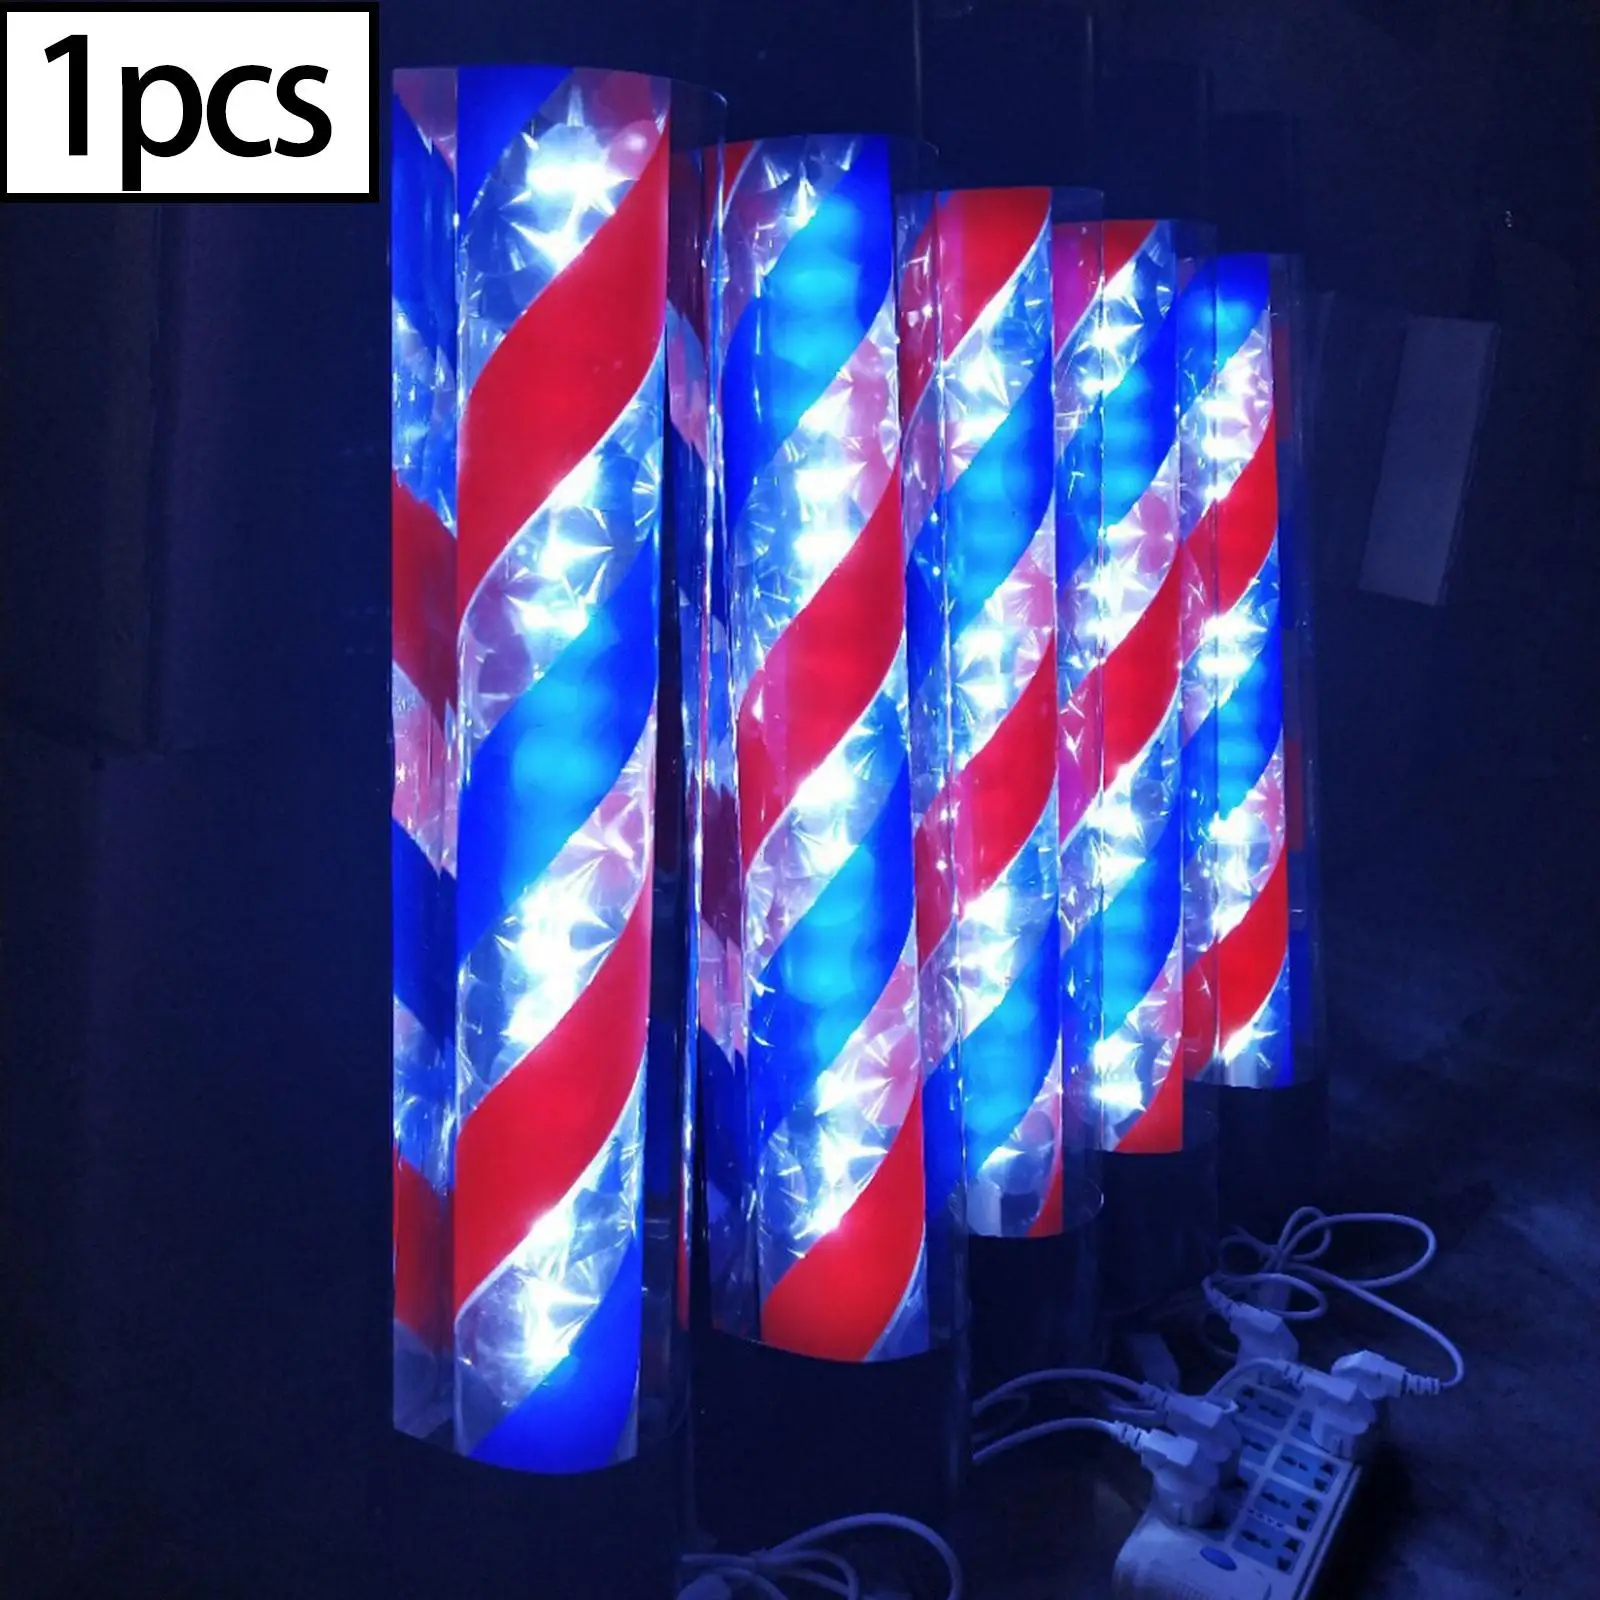 Classic Barber Pole LED Light Rotating Hair Salon Shop Sign W/ Hanging Bracket Energy Saving Wall Mount Illuminated for Party